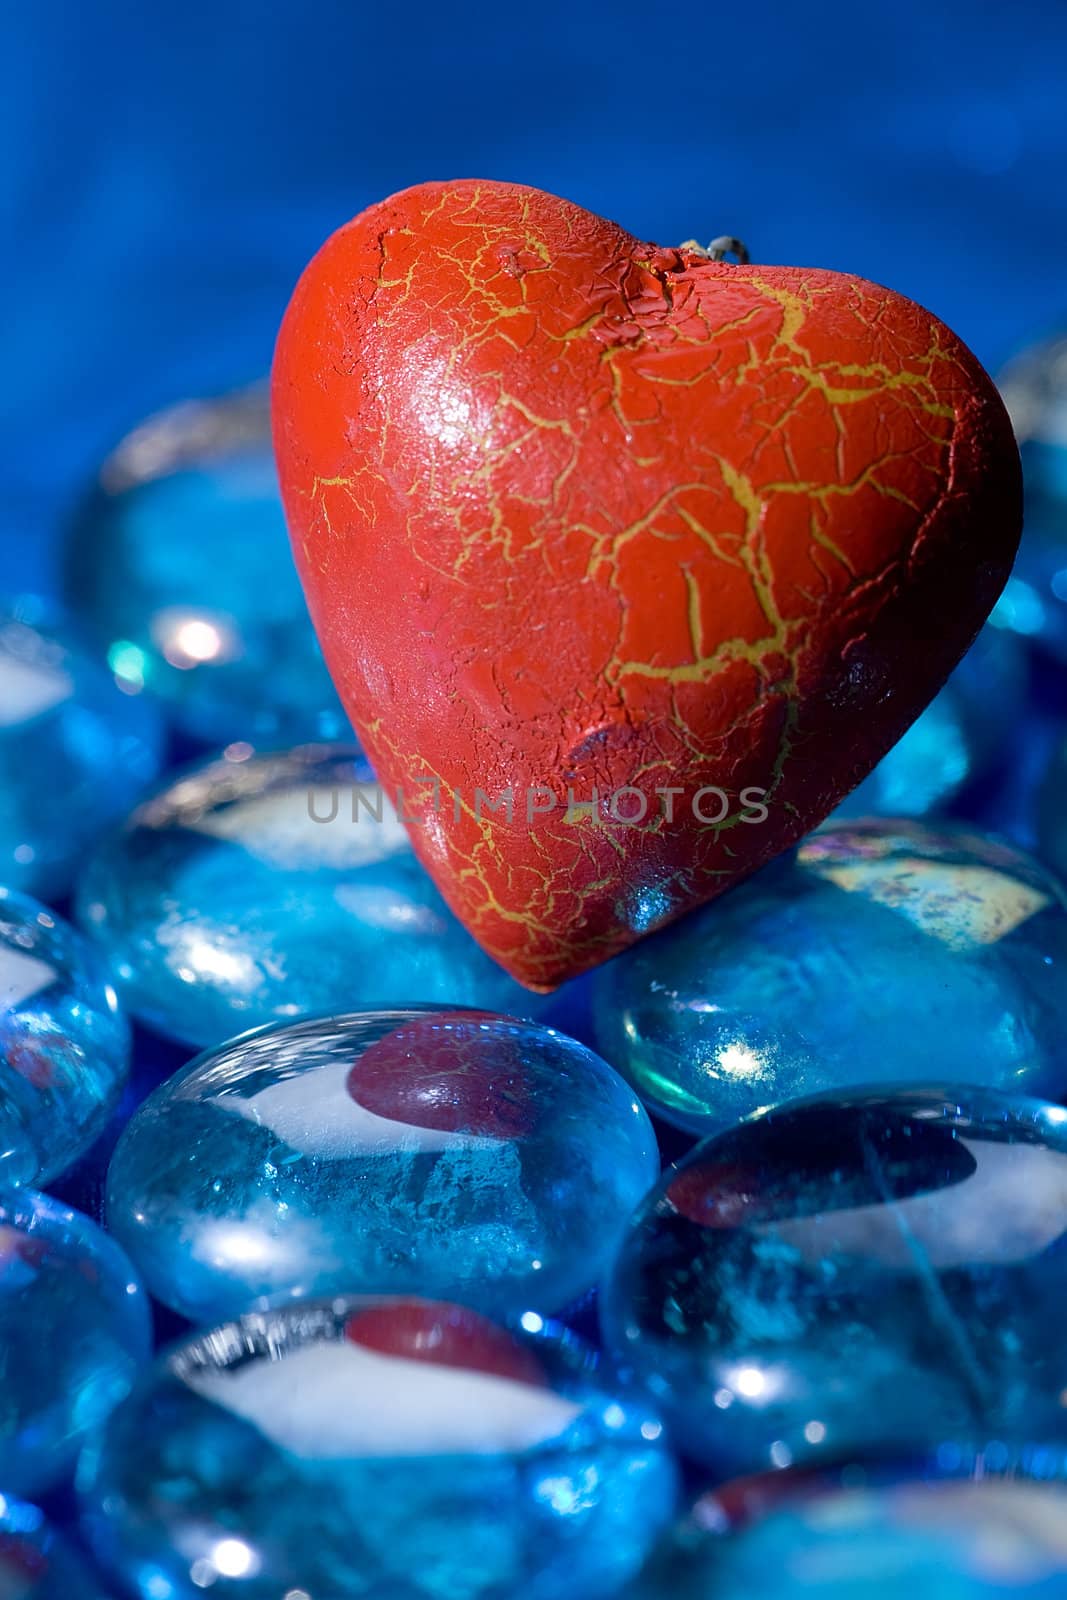 The red heart on the blue crystals